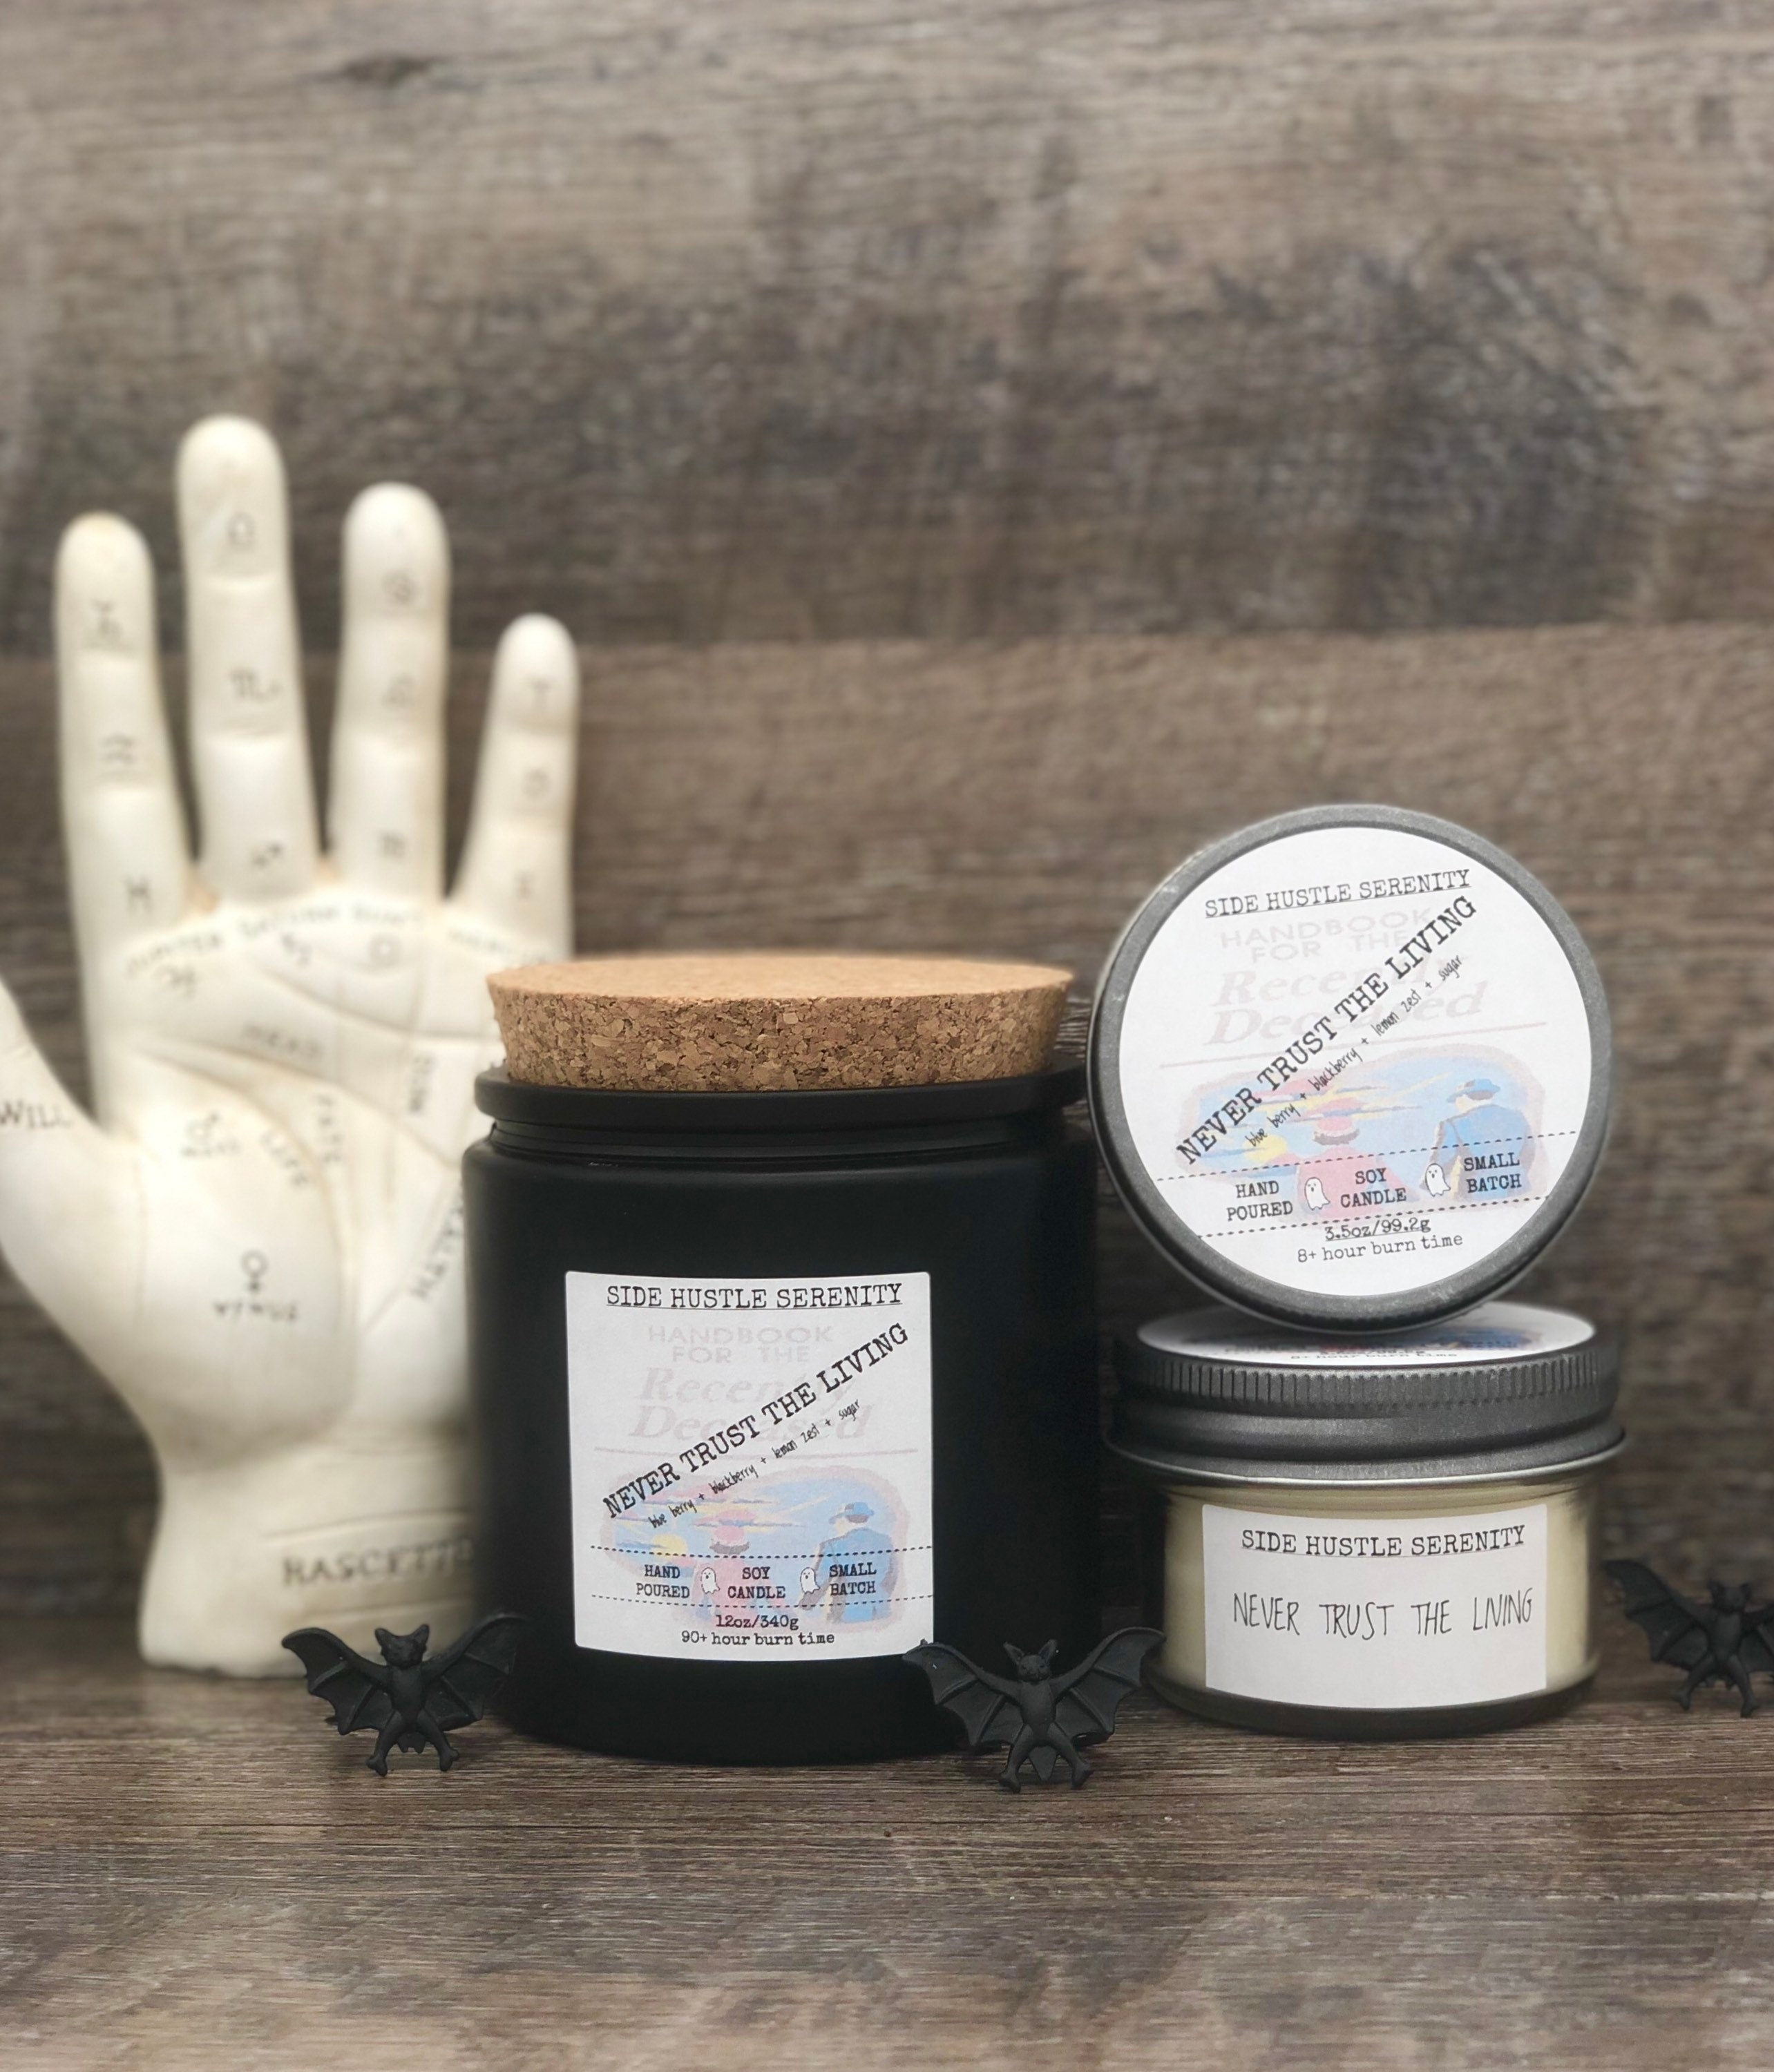 Never Trust the Living |  Blueberry Scented Soy Candle | 3.5oz Candle Jar | Cult Classic | Halloween | Spooky | Beetlejuice | Haunted Horror